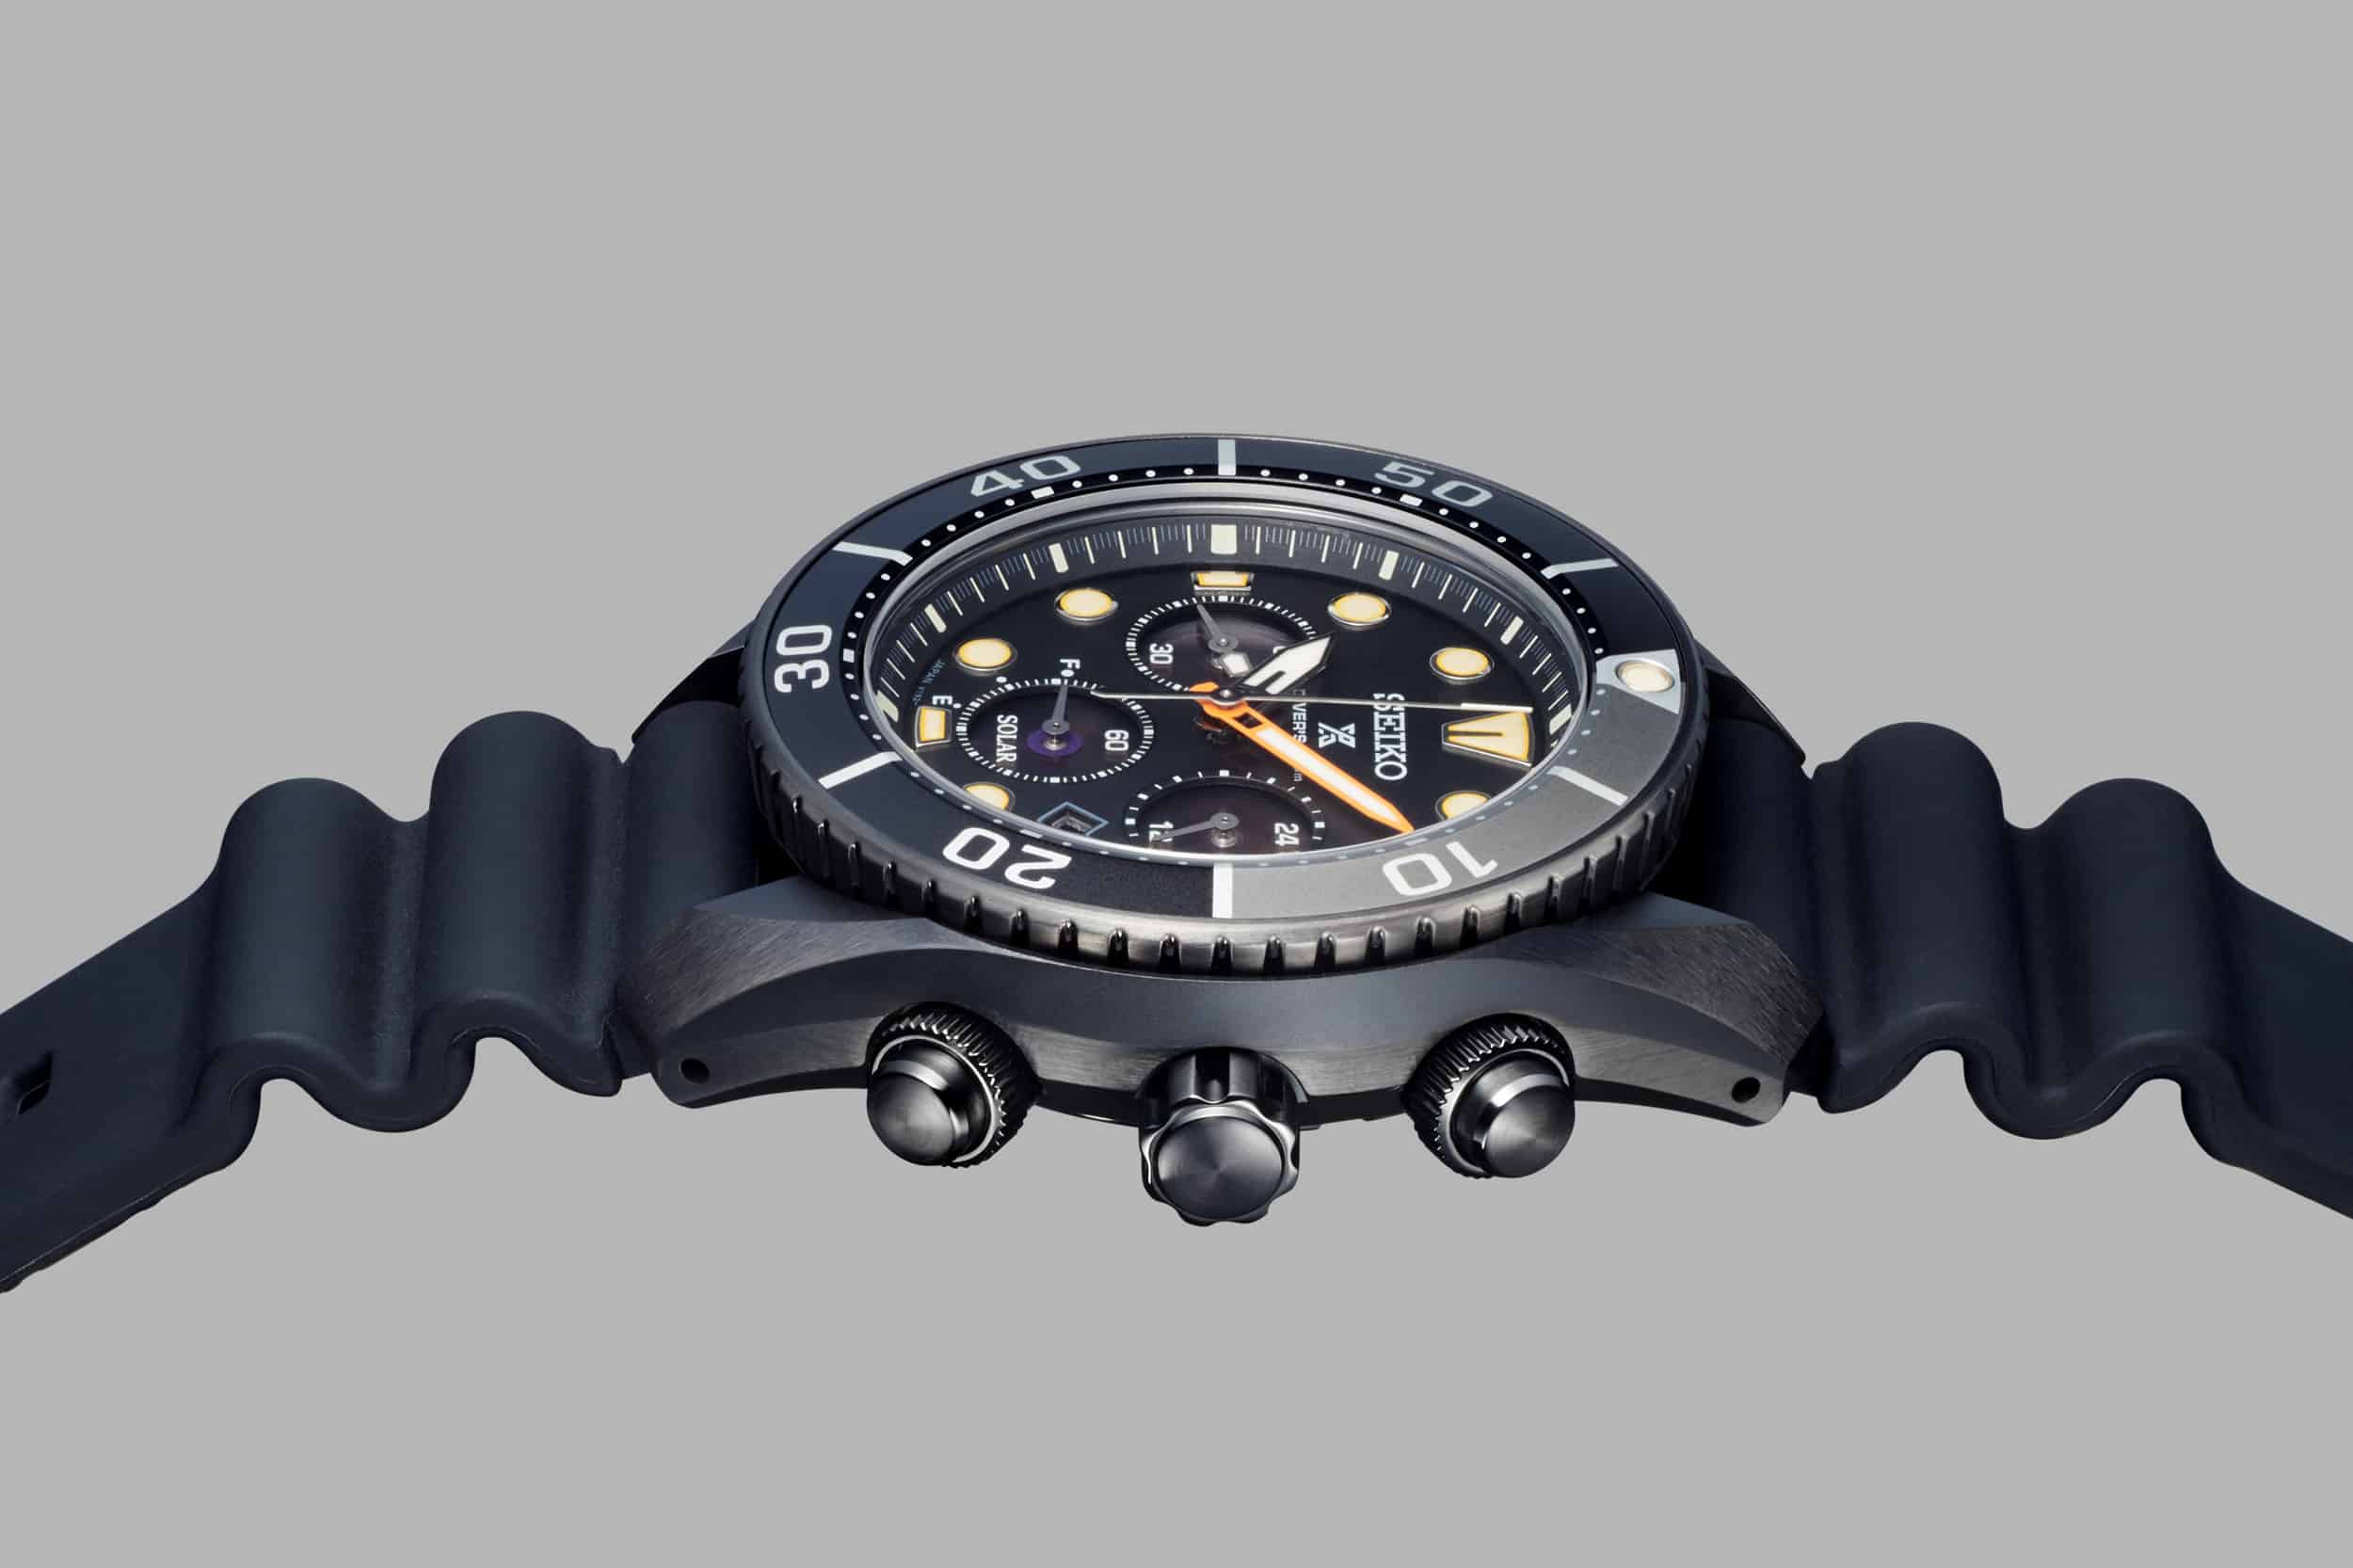 Introducing the Seiko Prospex Black Series Limited Edition - Worn & Wound